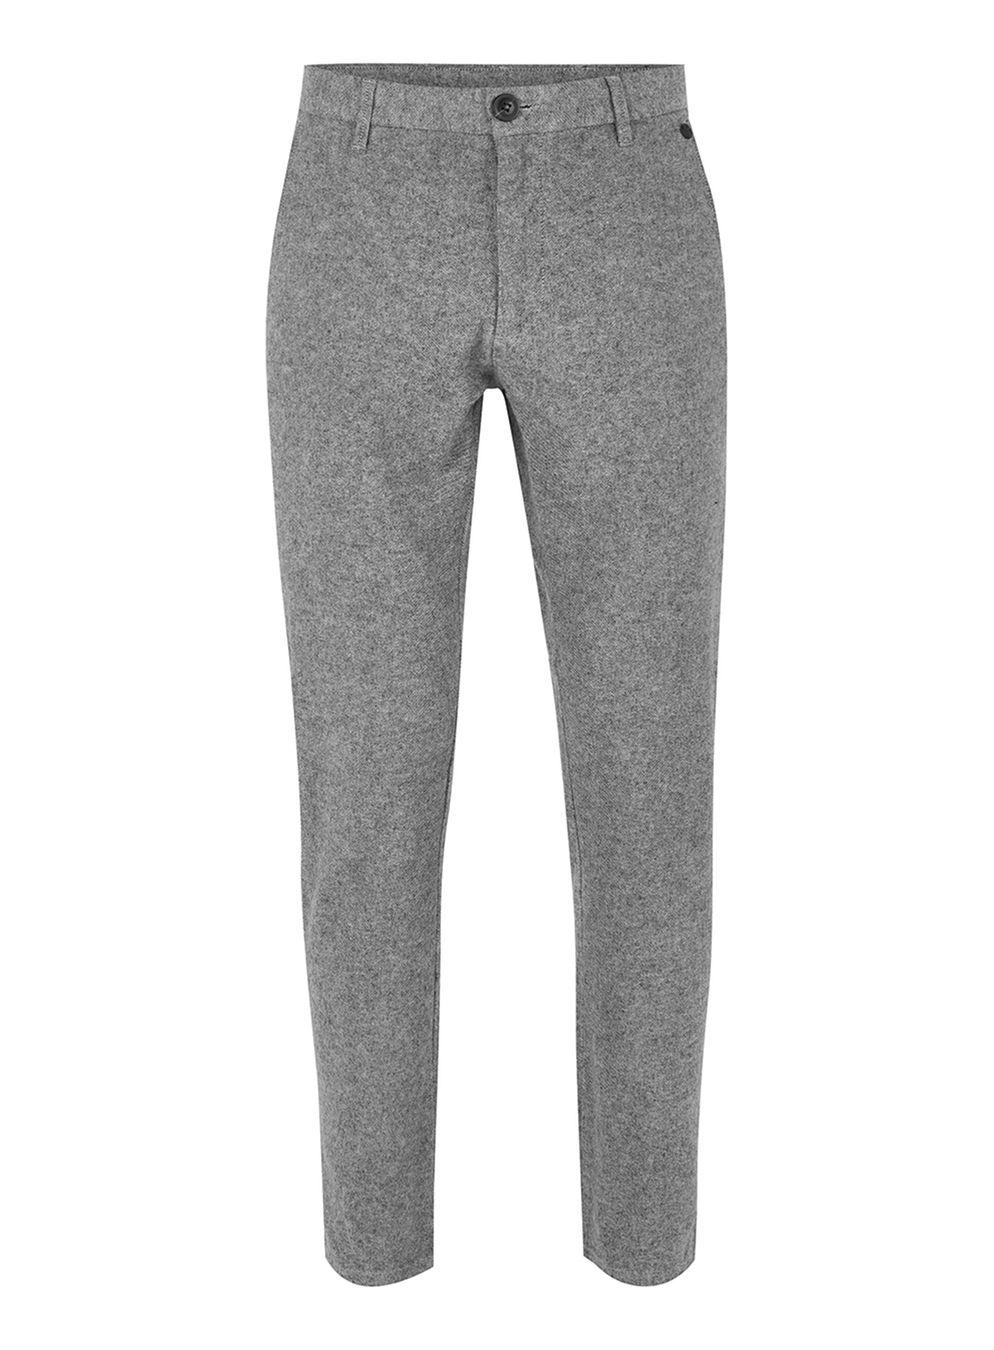 SELECTED Cotton Grey Trouser in Gray for Men - Lyst